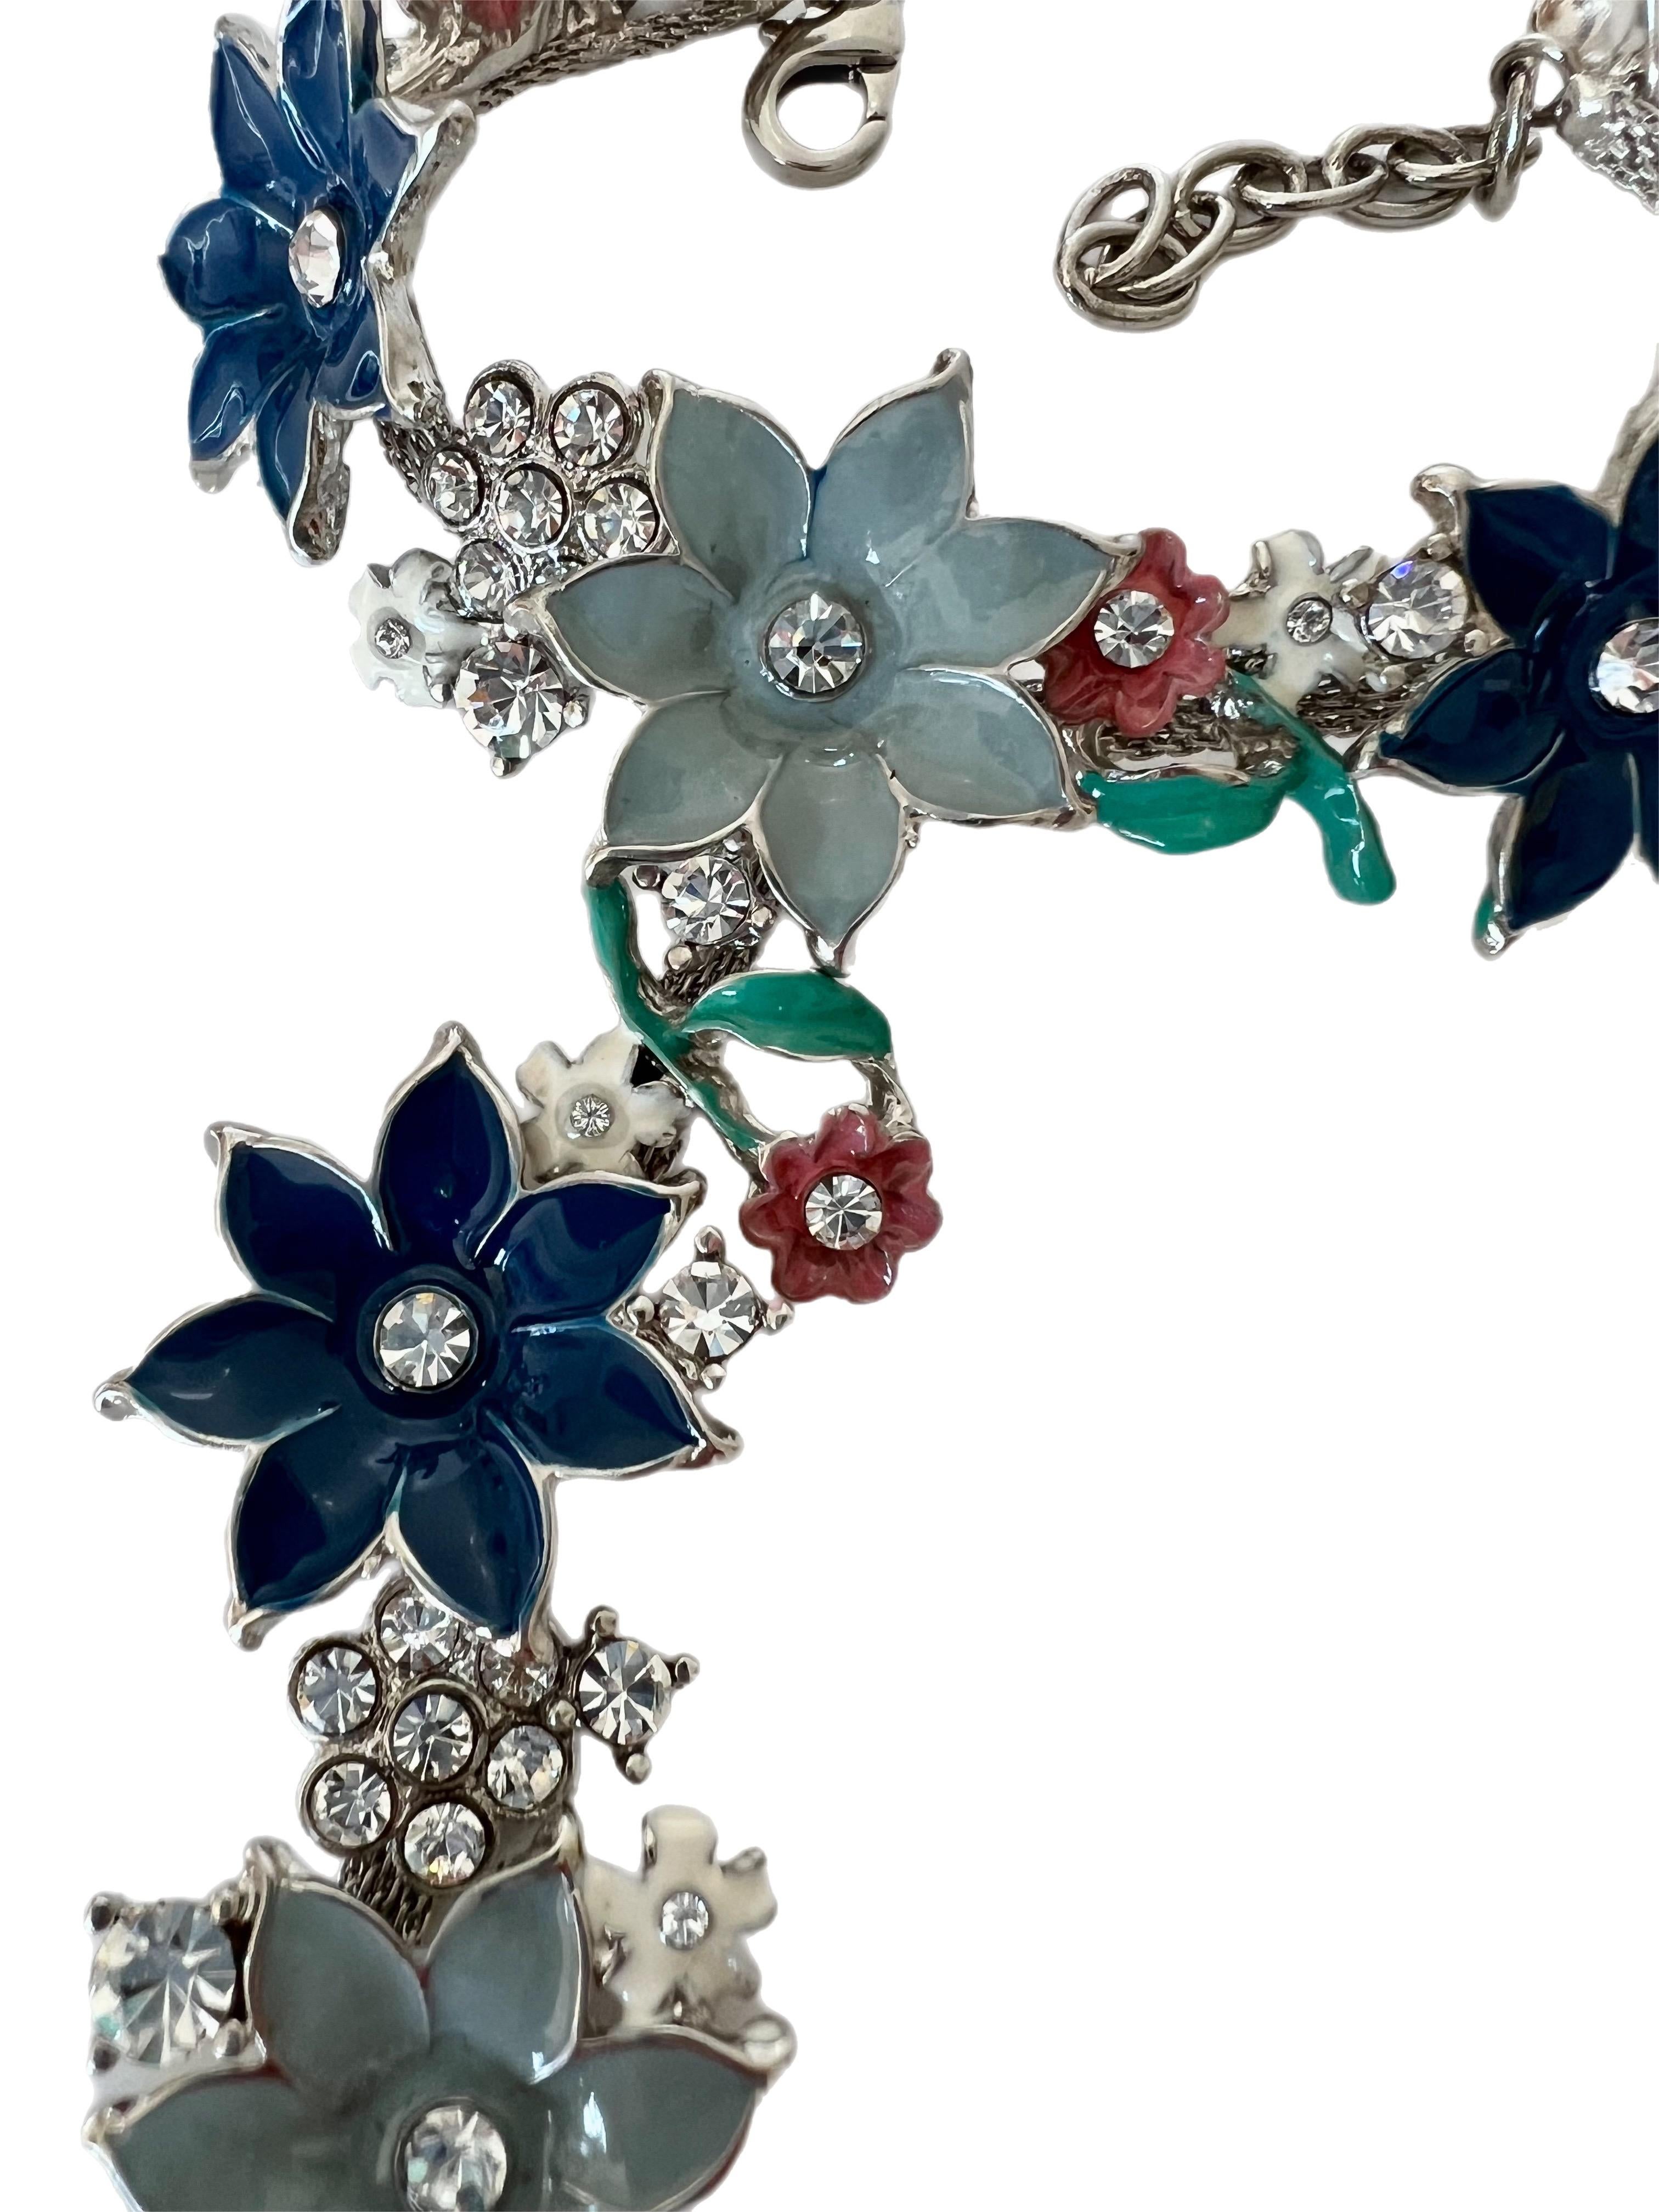 This original Pelush flower enameled pink and blue bracelet ring with crystals is a one of a kind exclusive piece. Made in Florence by local master artisans which have a long heritage of metalworking techniques. Each tridimensional flower is